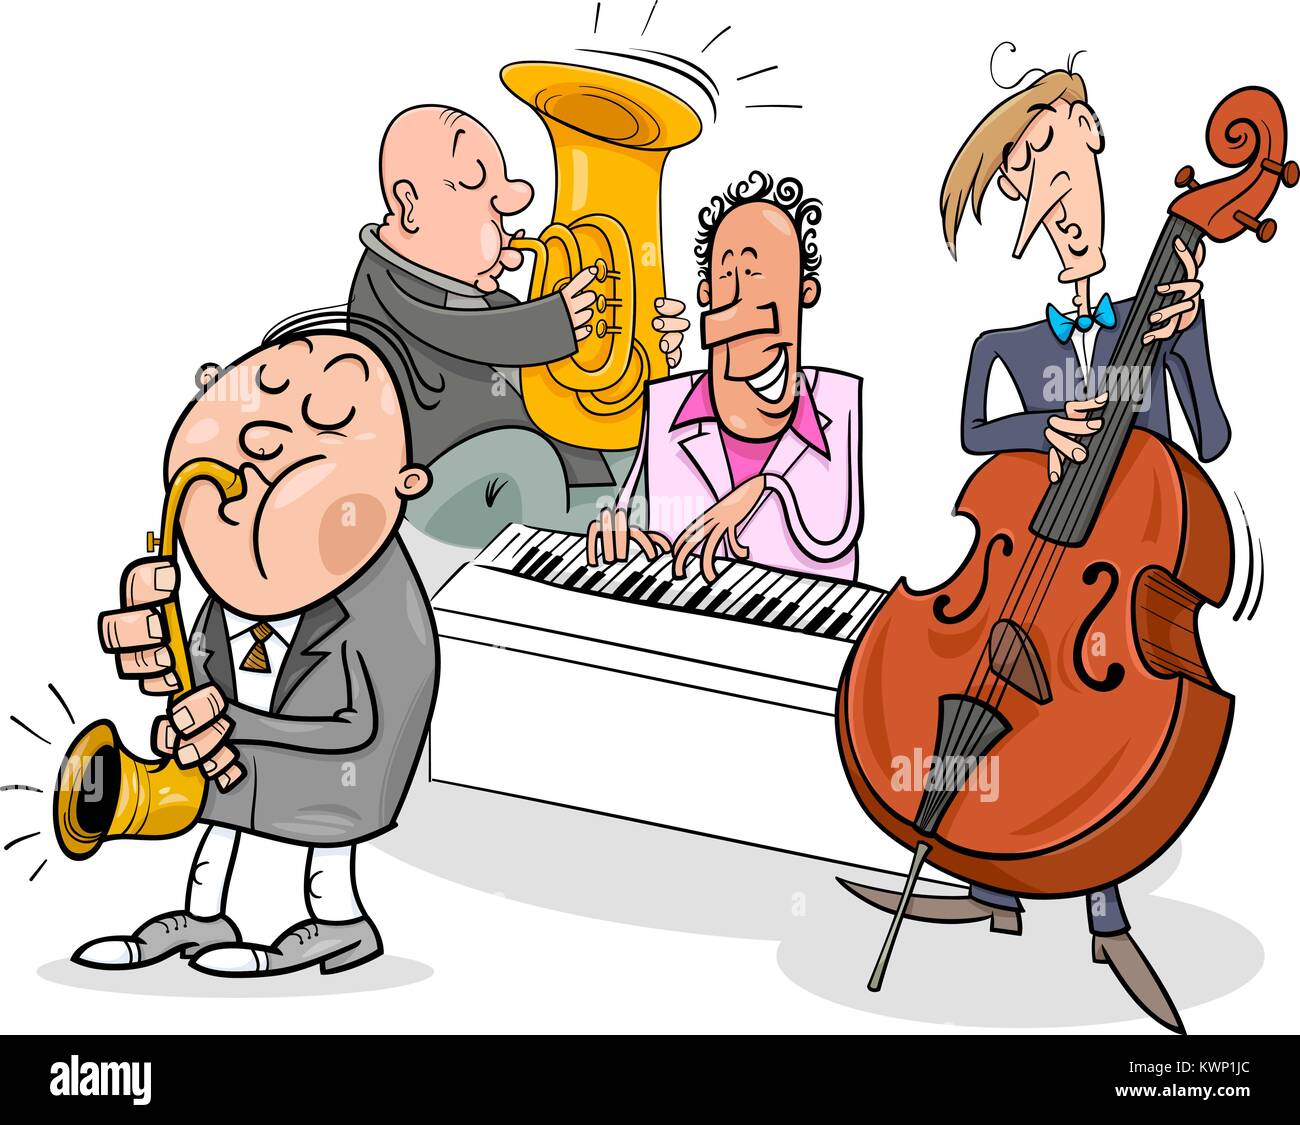 Cartoon Illustration of Jazz Musicians Band Playing a Concert Stock Vector